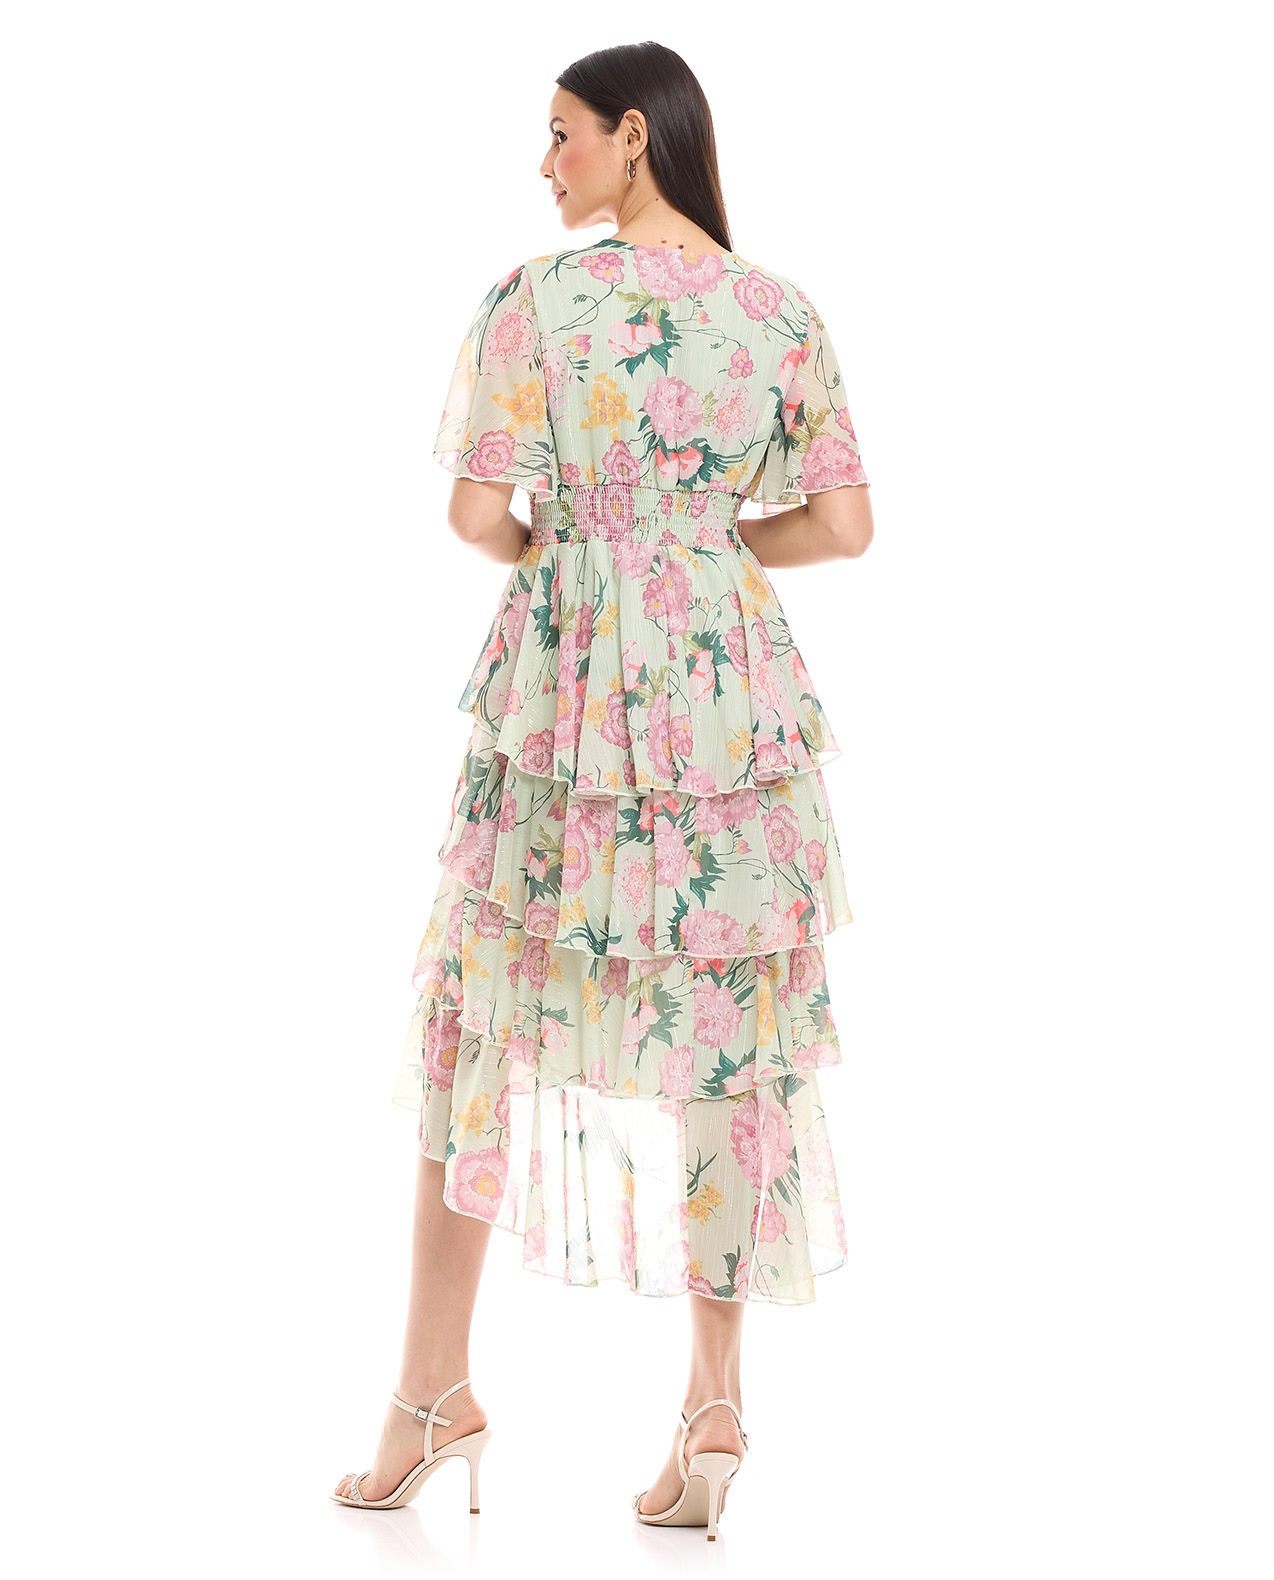 Floral Print Layered Dress with V-Neck and Flared Sleeves